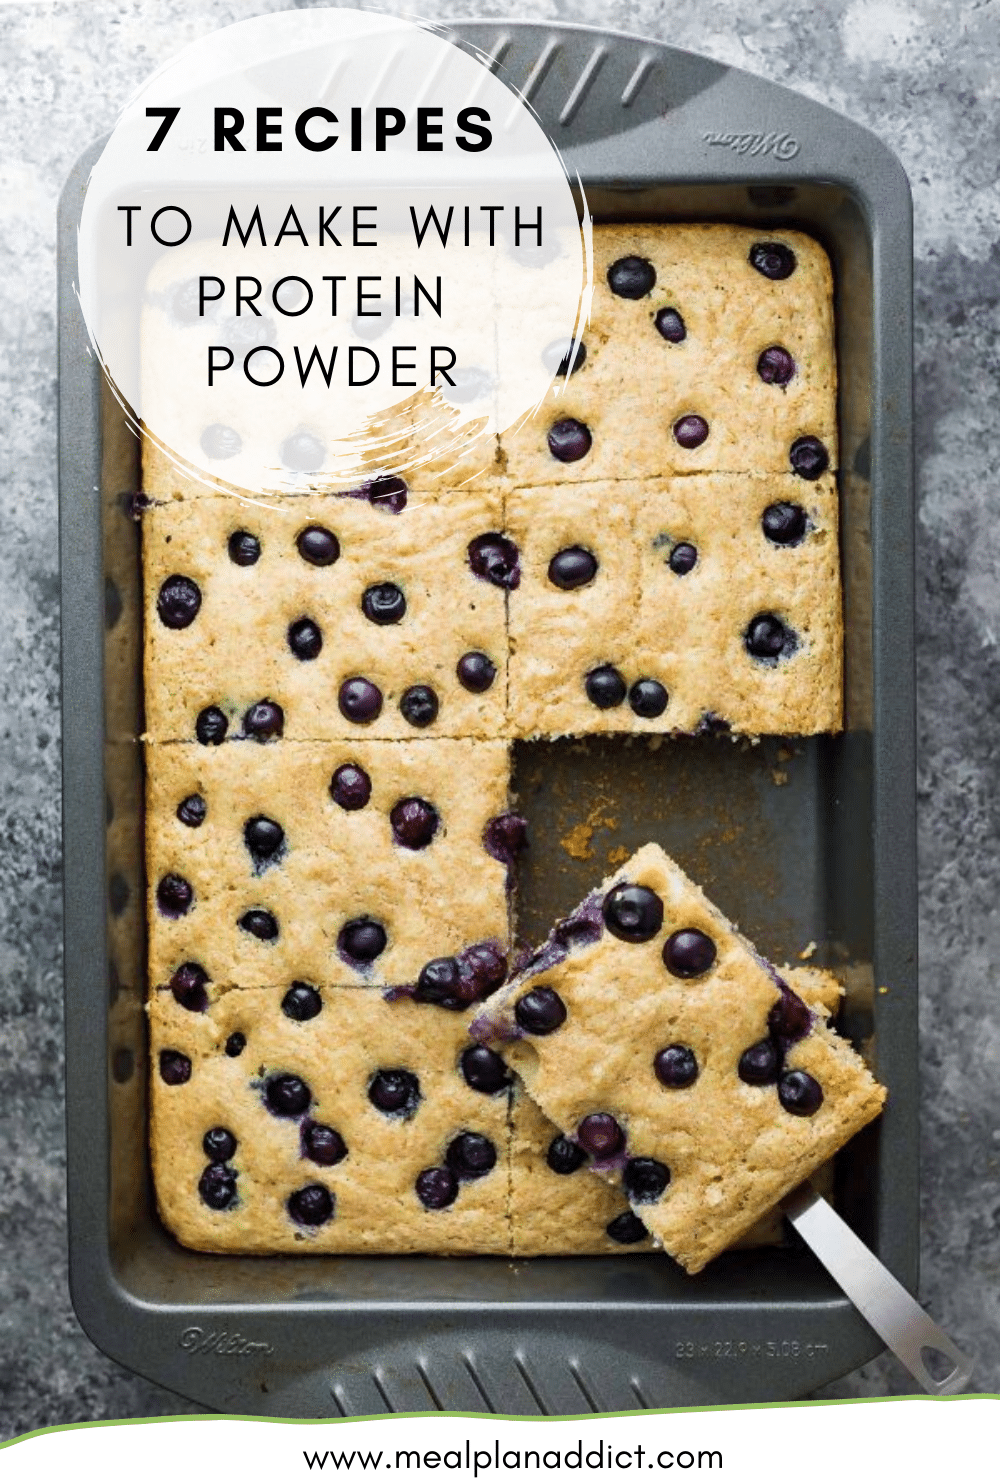 7 recipes to make with protein powder